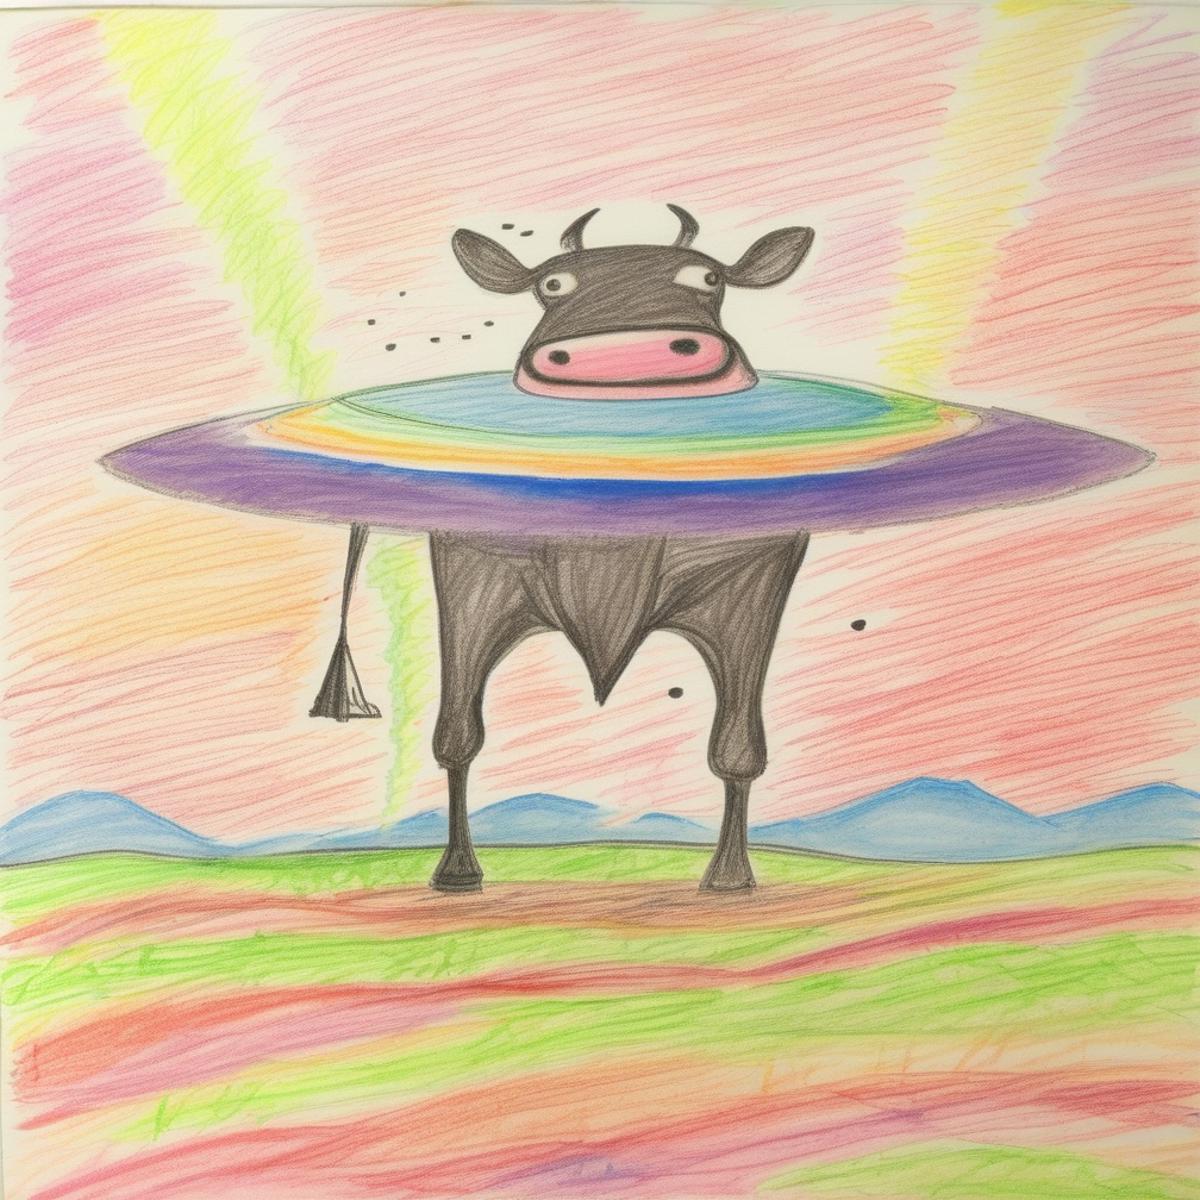 A drawing of a cow on a rainbow colored Frisbee.